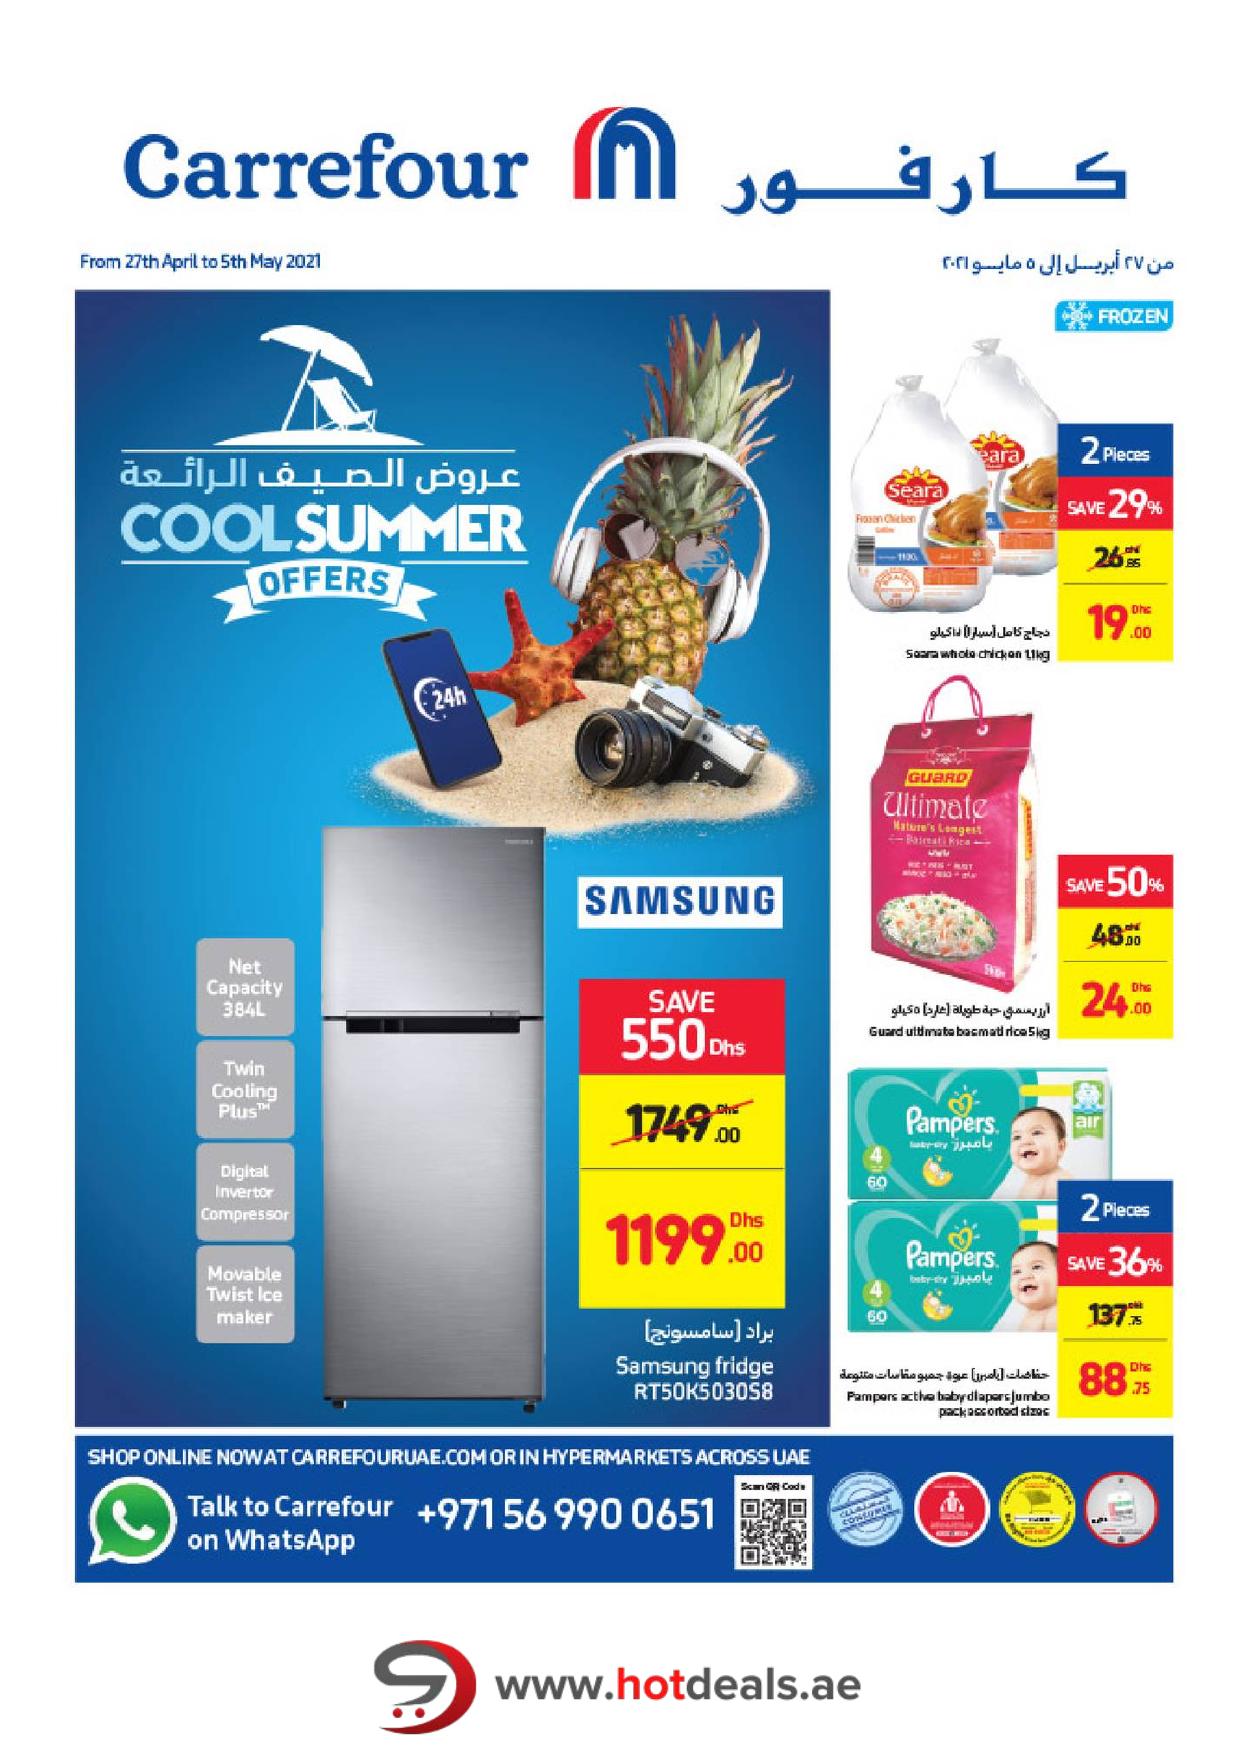 <p><span style="font-size: 18px;"><font color="#424242">Cool Summer Offers</font></span><br></p>